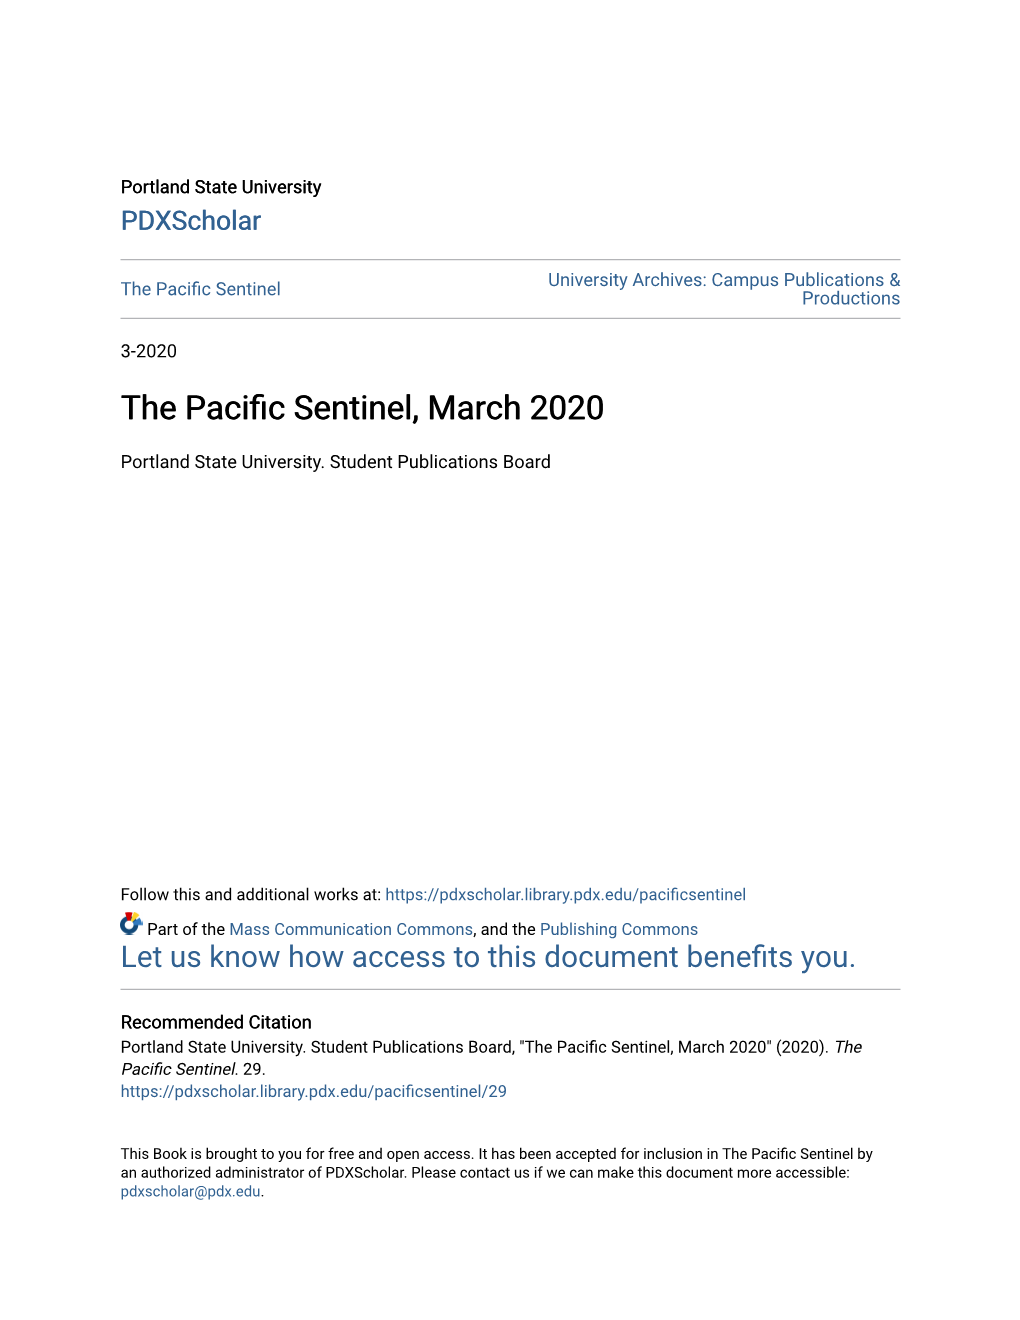 The Pacific Sentinel, March 2020